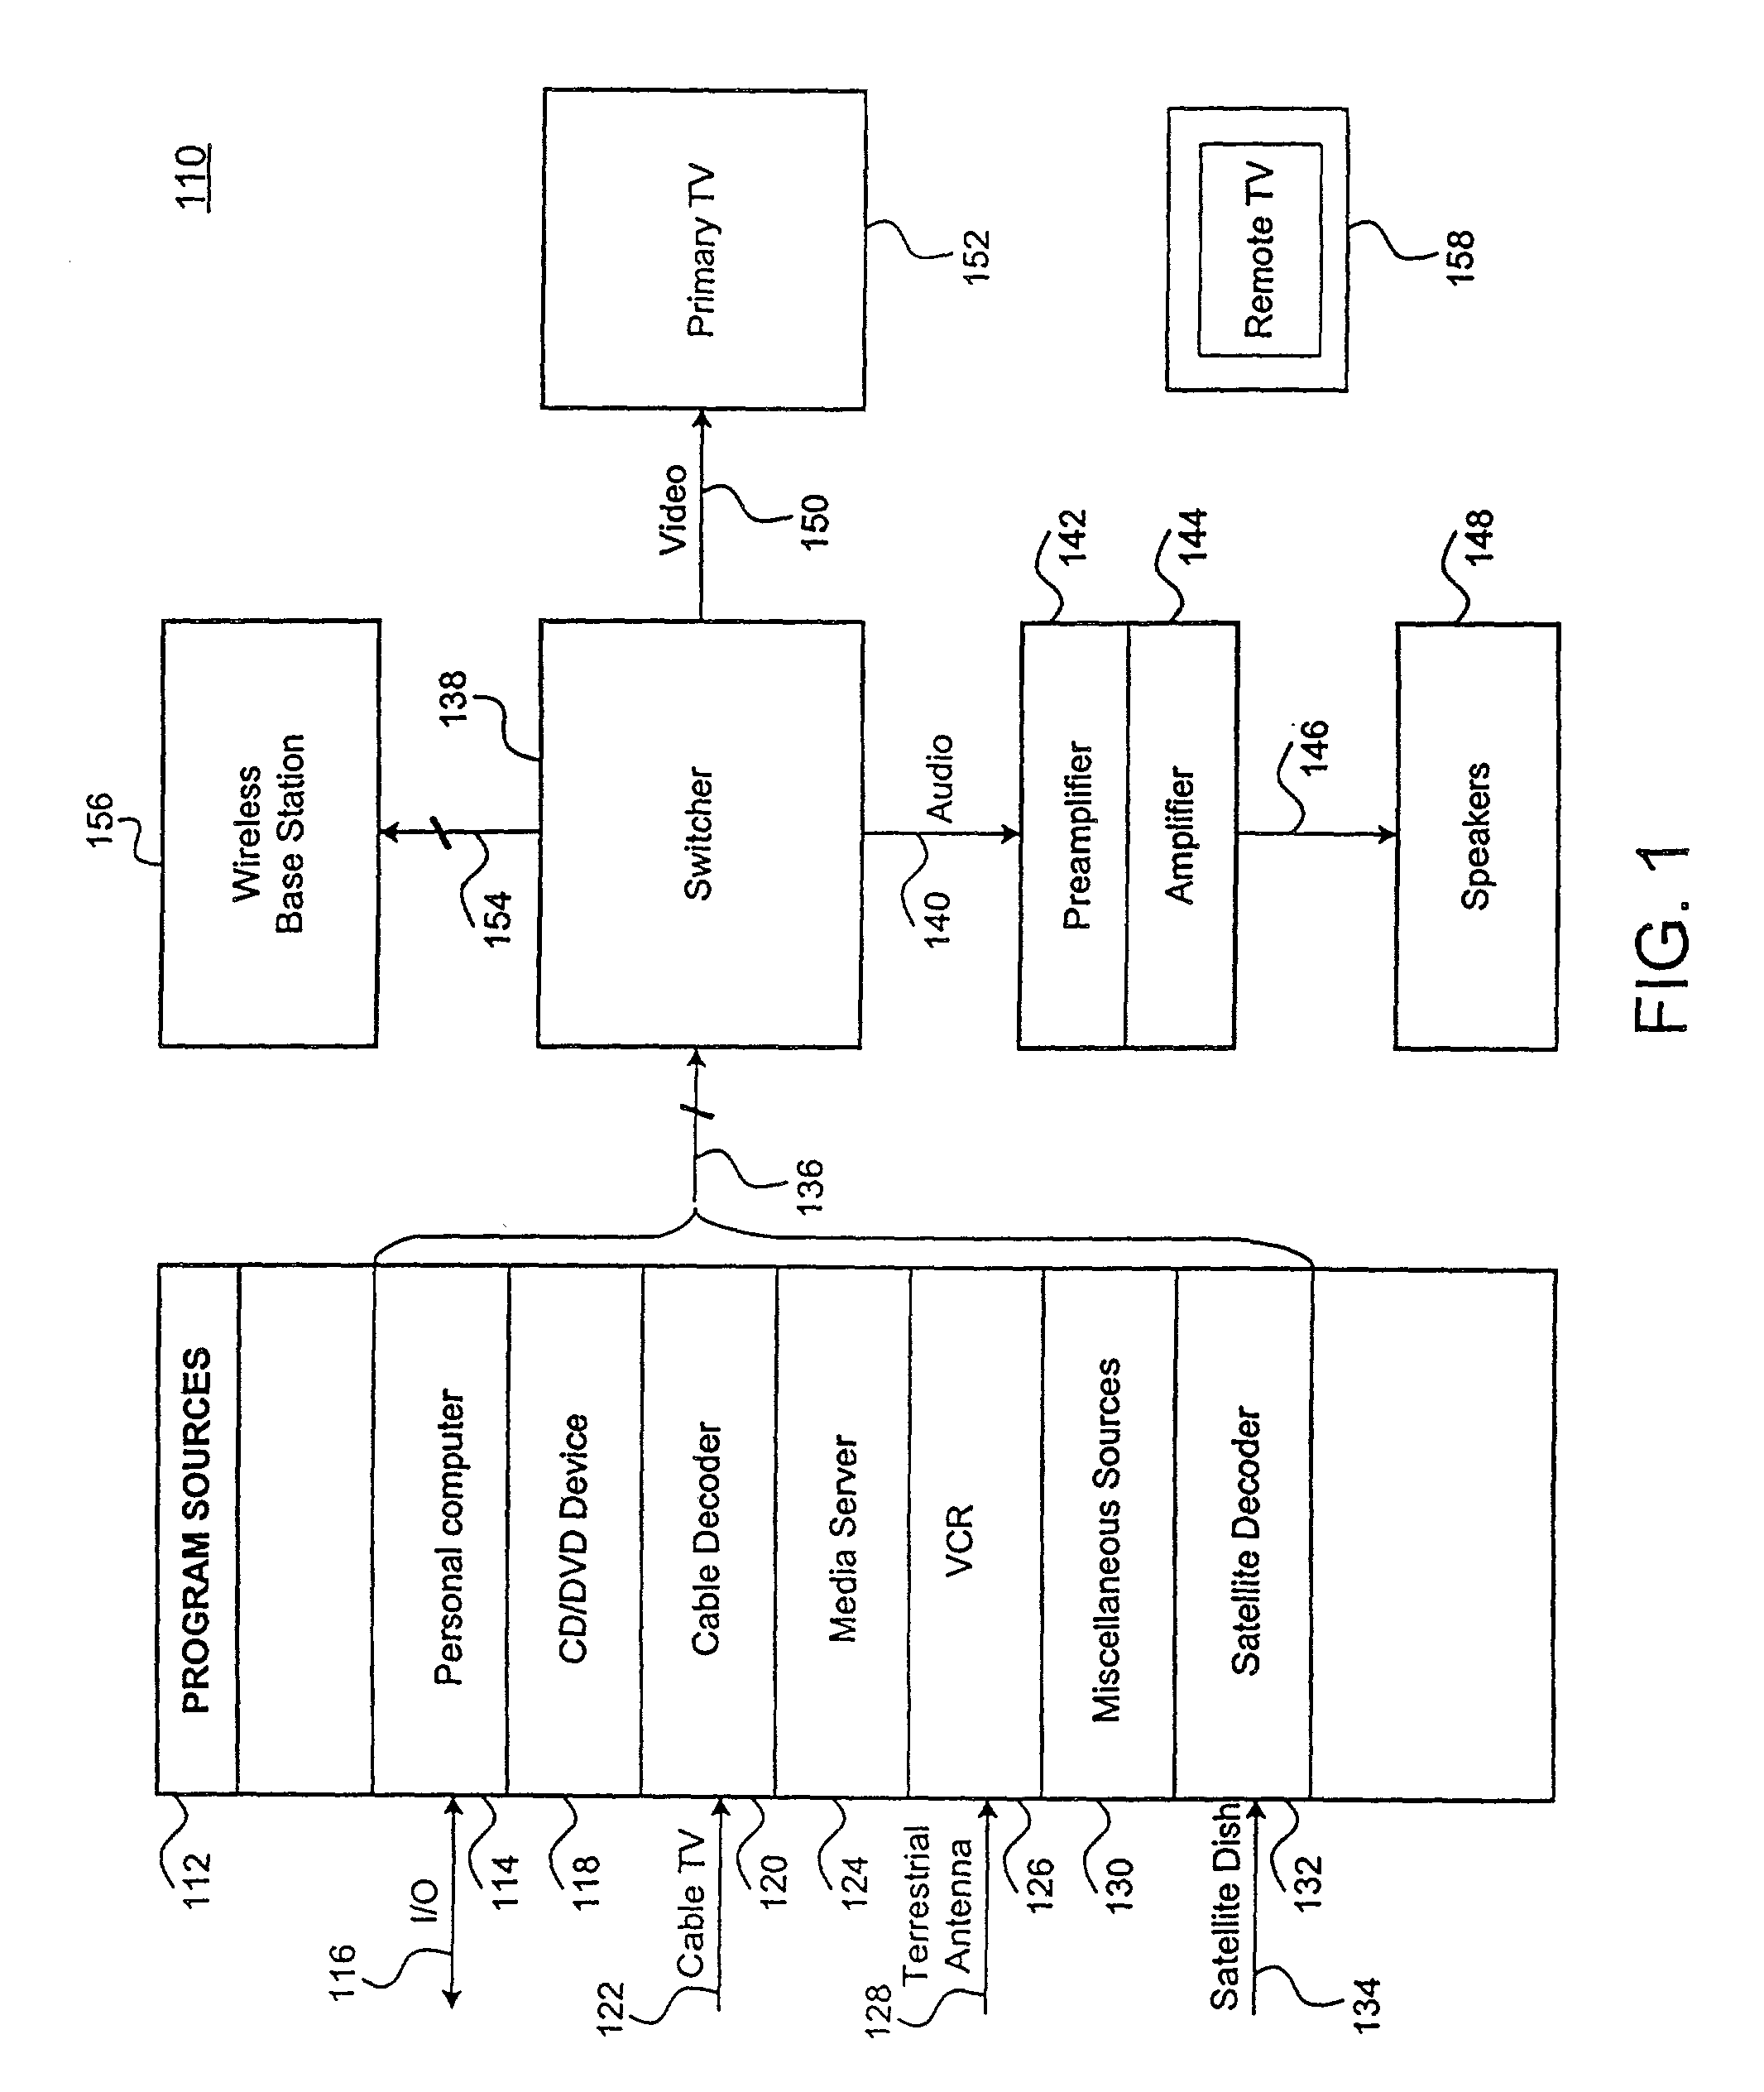 Method for implementing a remote display system with transcoding